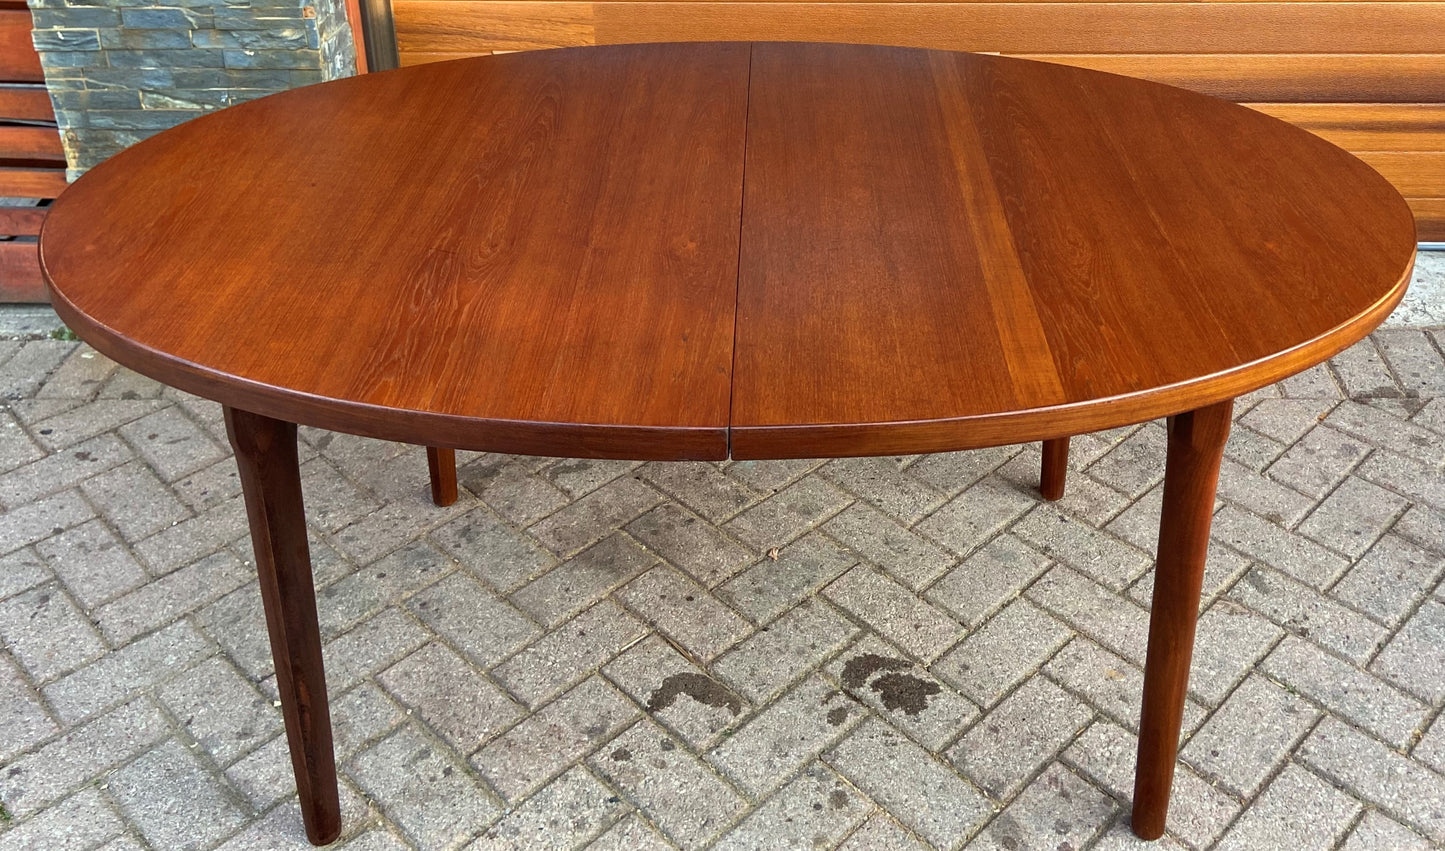 REFINISHED Mid Century Modern Teak Table w 3 Leaves by Punch Designs 64"-100"